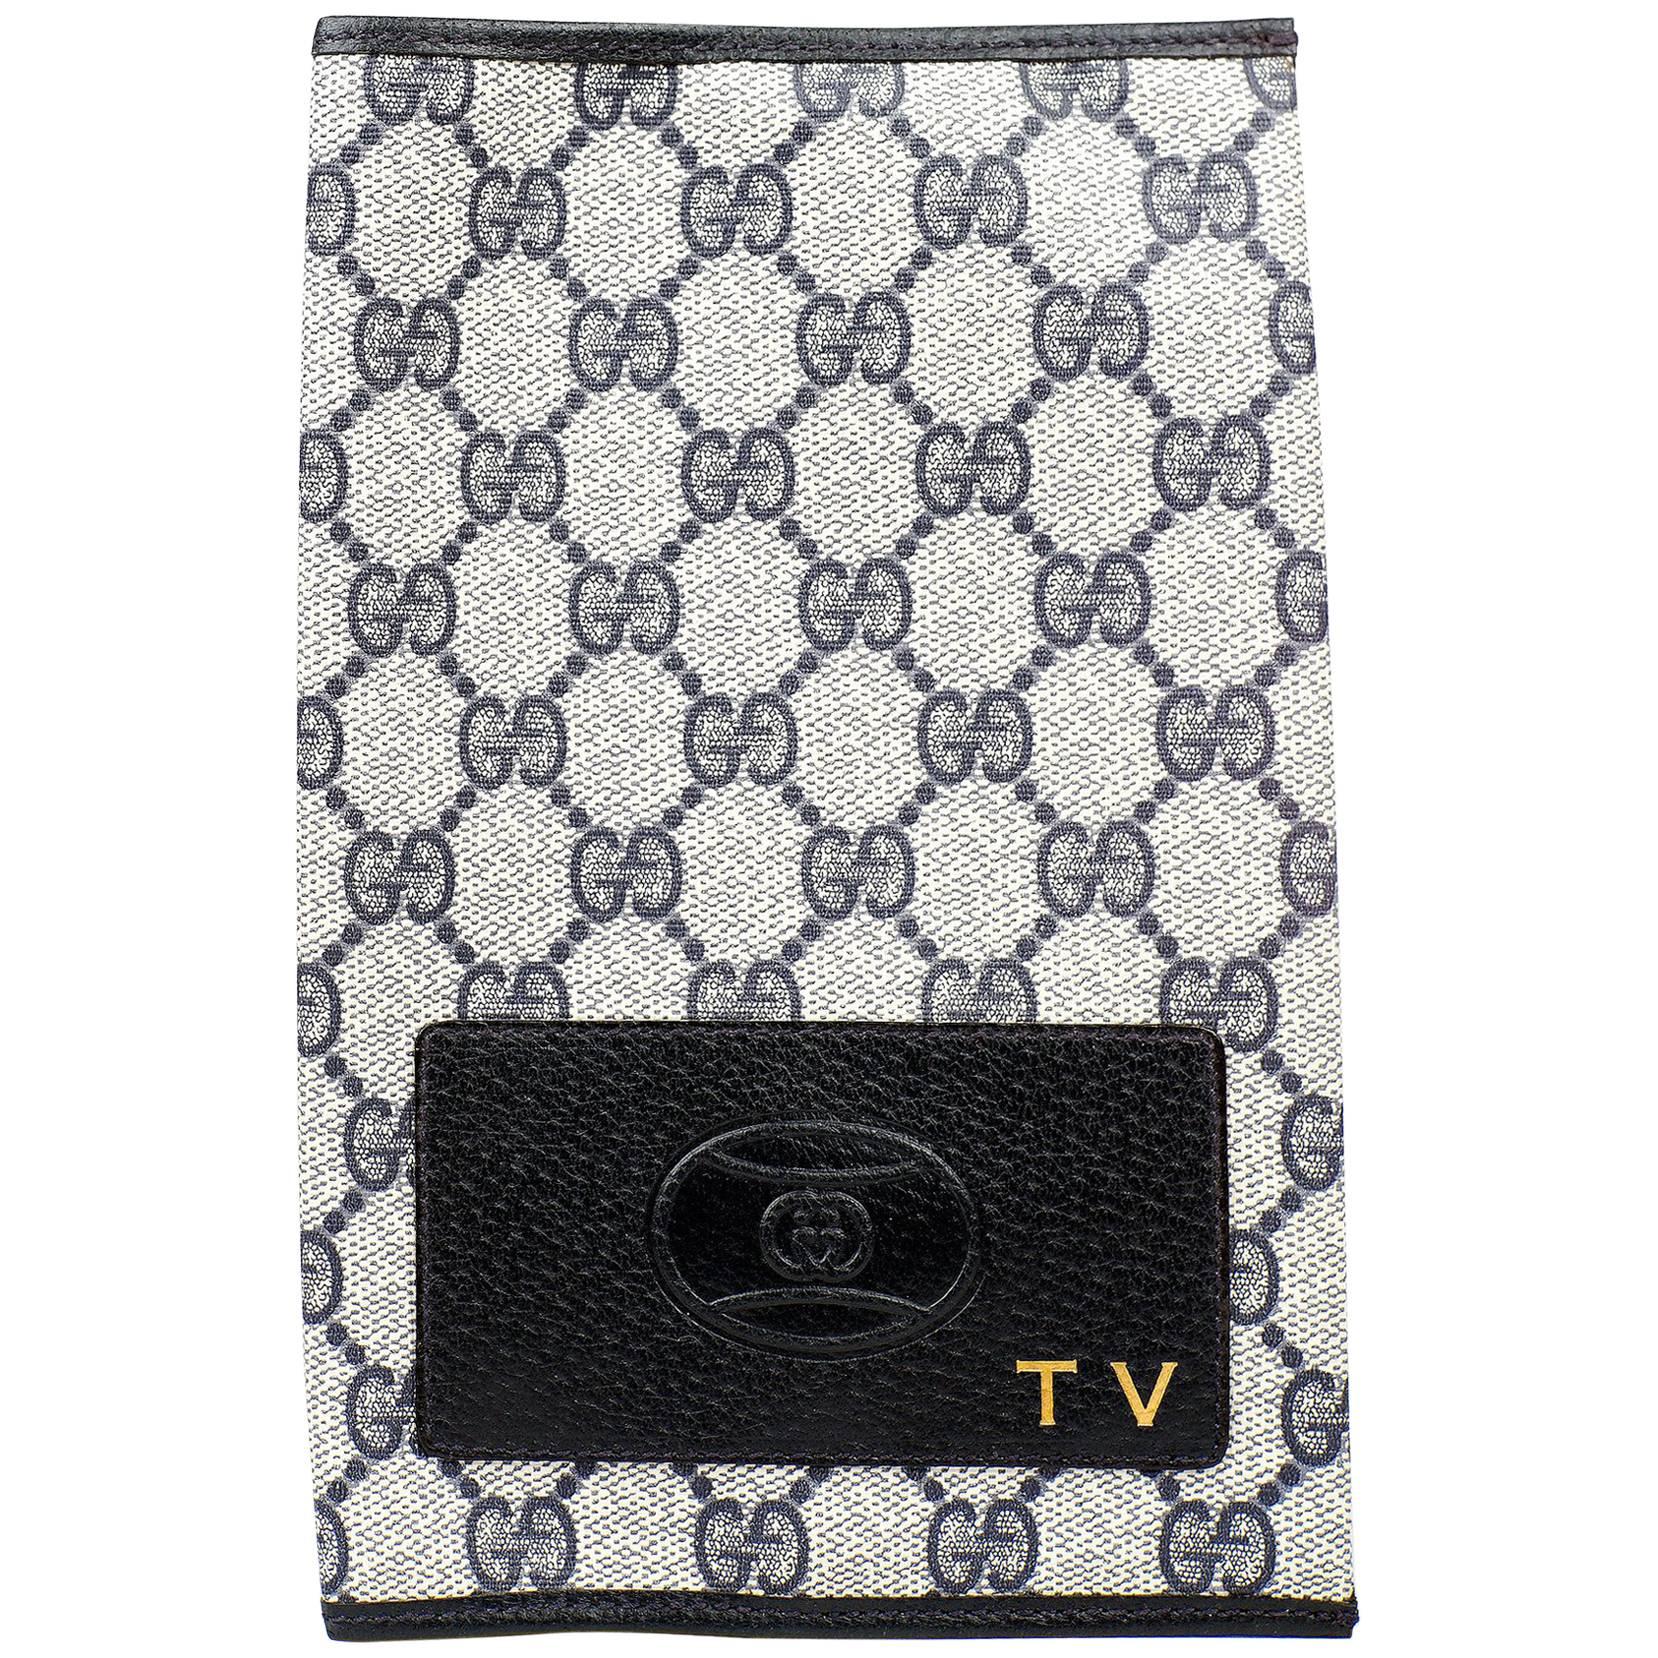 Gucci Anniversary Collection TV Guide Holder